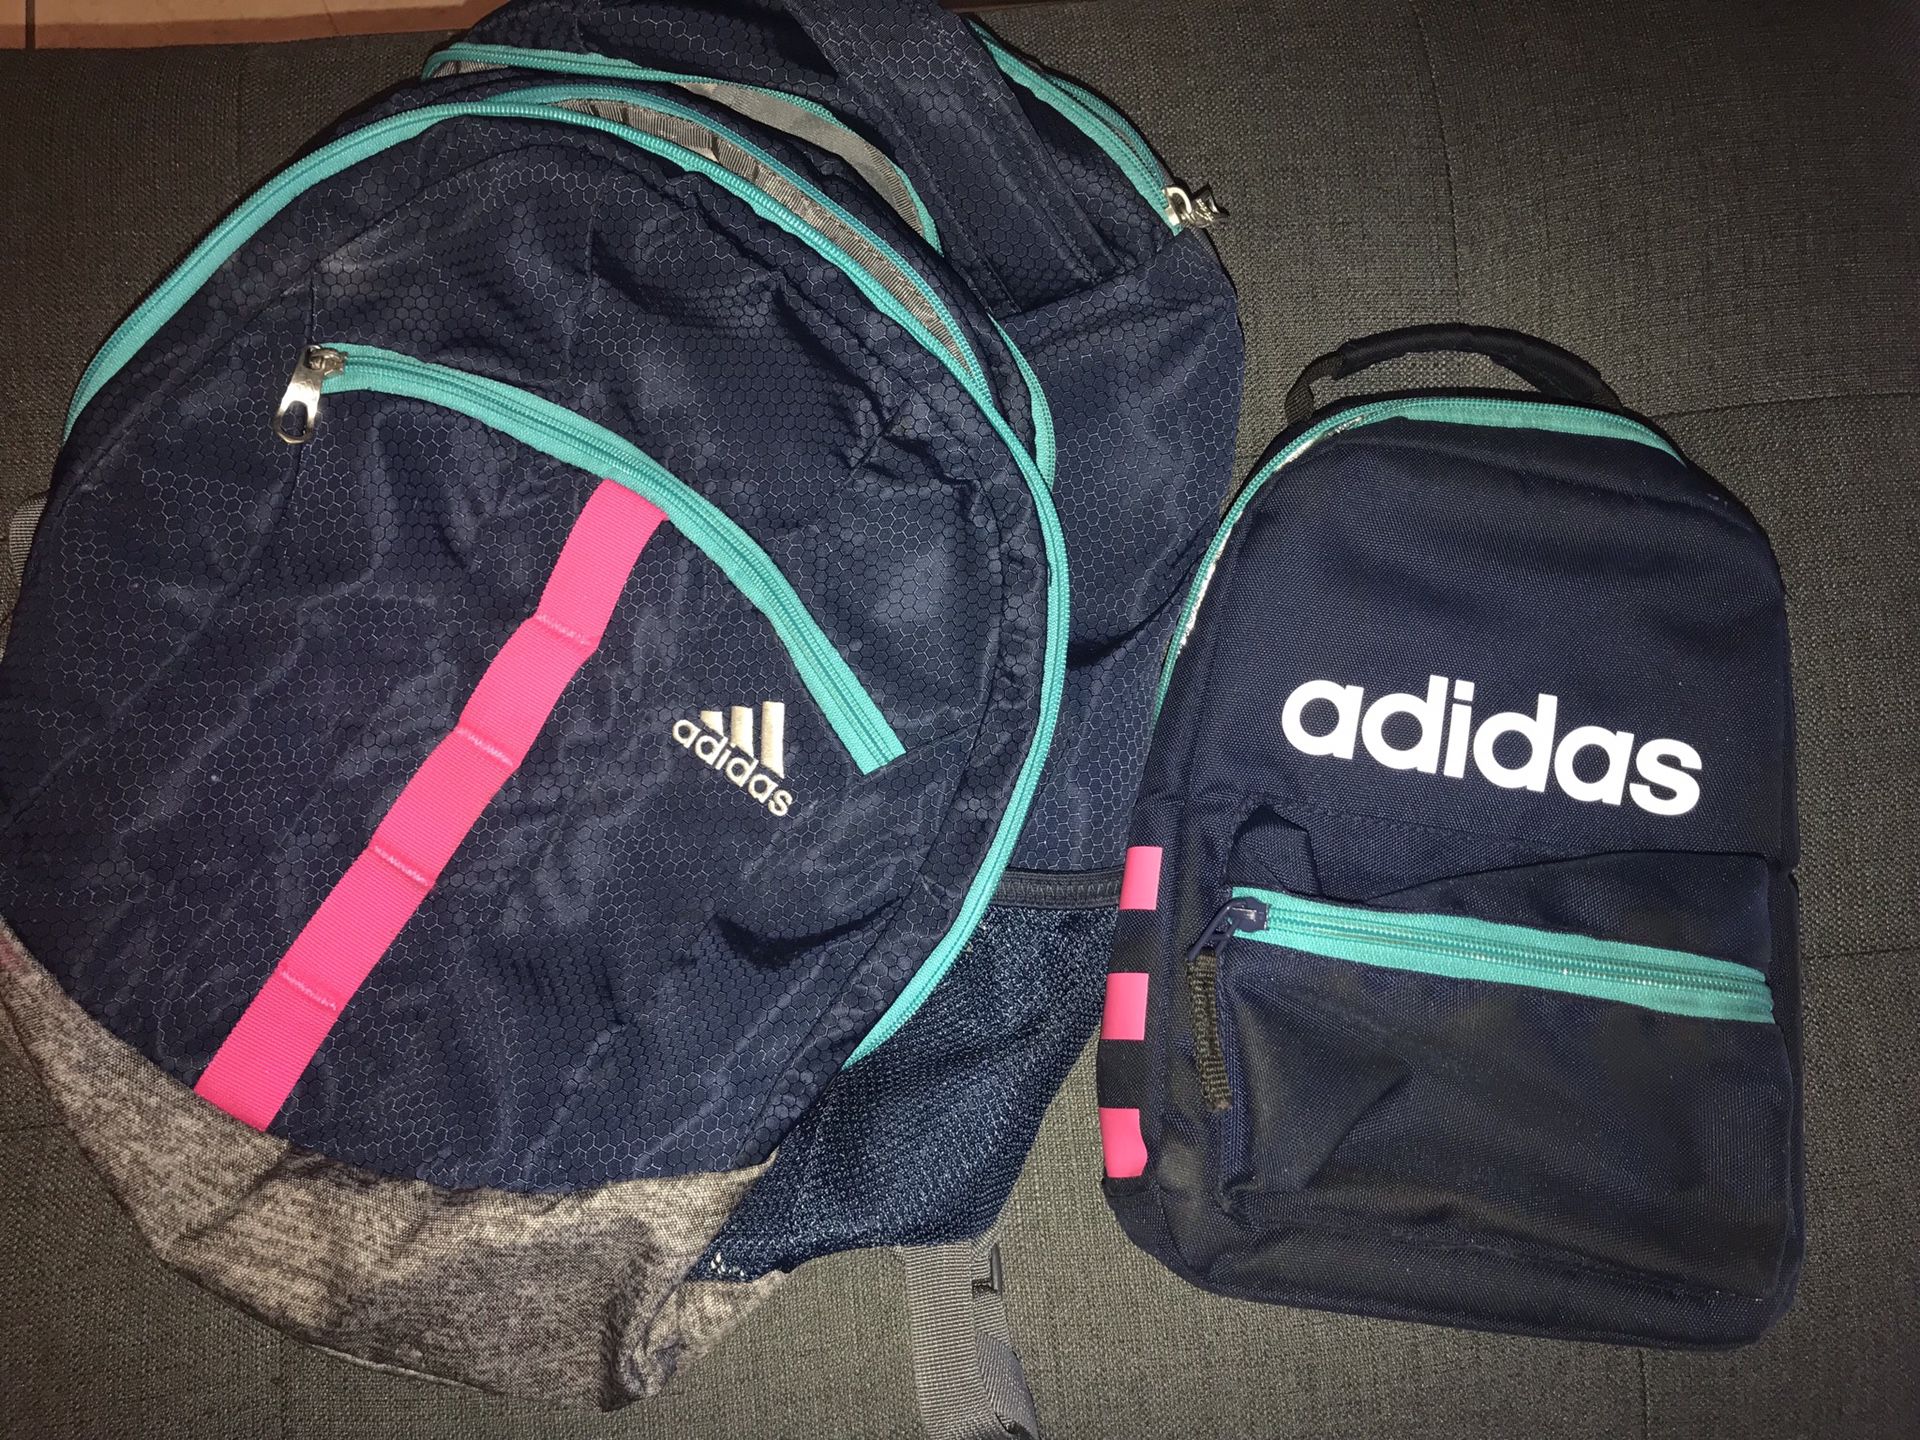 Adidas BackPack and Lunch Bag